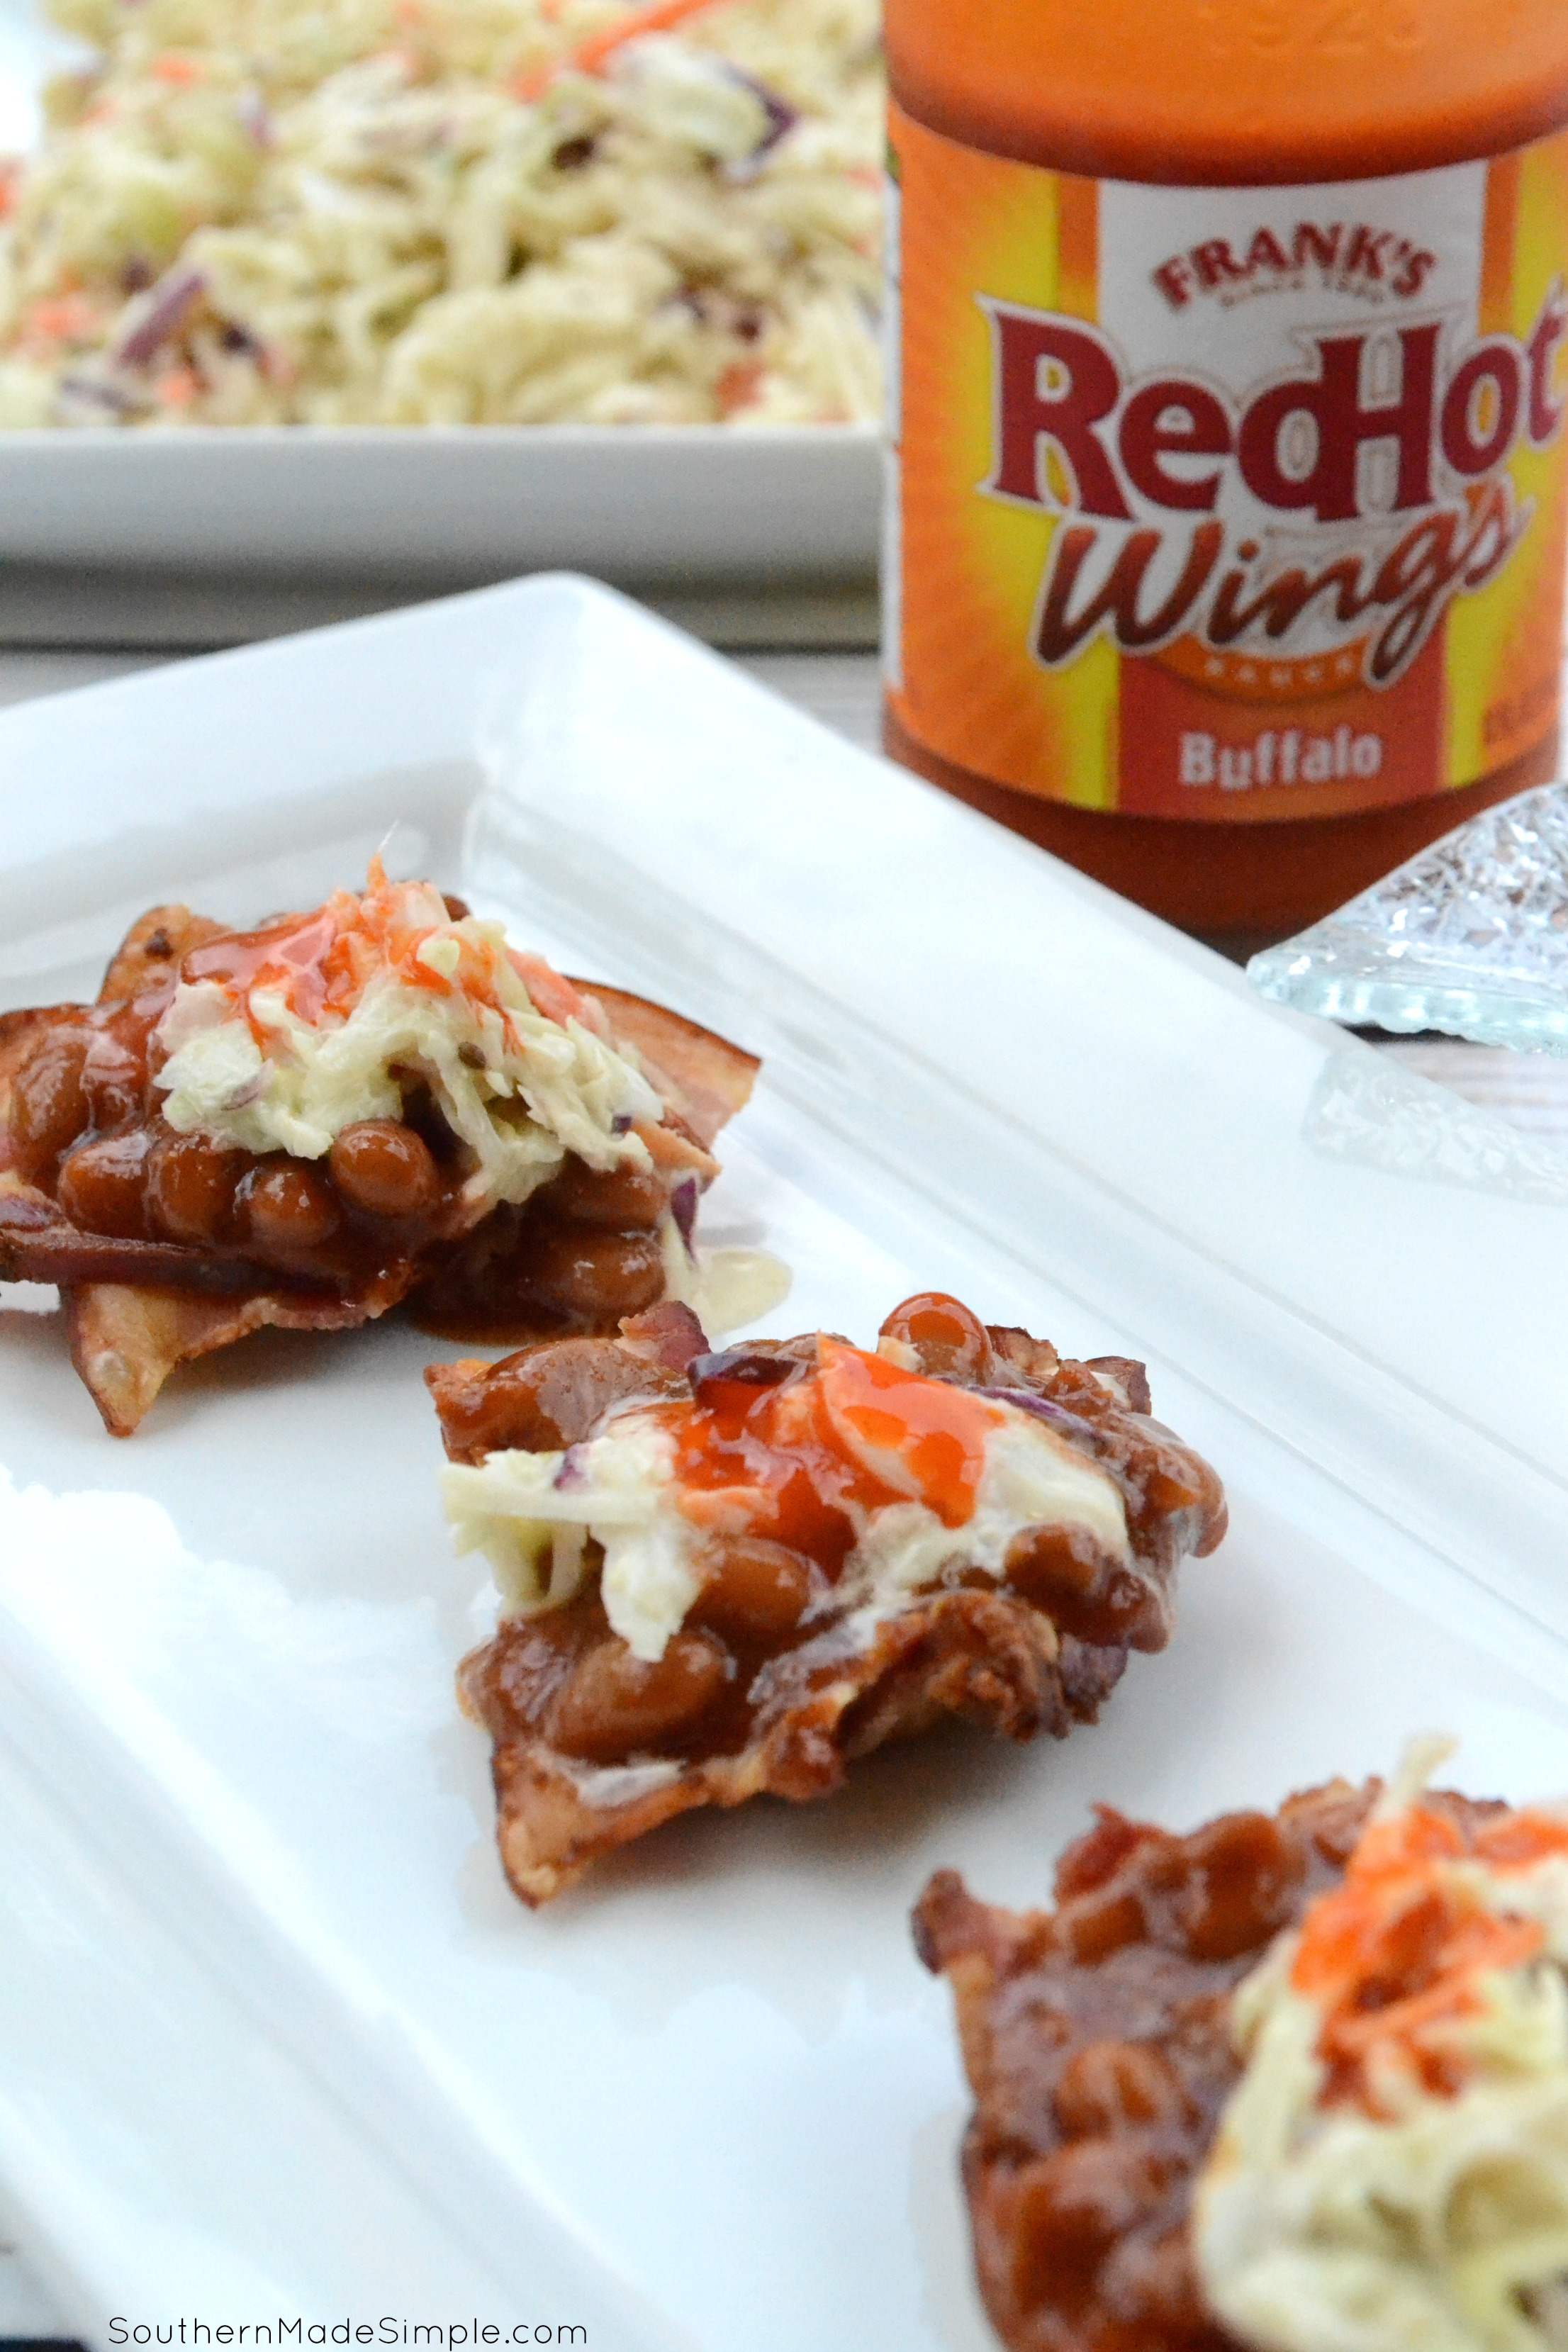 Looking for that perfect summer dish to serve during your backyard BBQ festivities? These Buffalo BBQ and Baked Bean Bacon cups pack a punch of heat you won't be able to resist, plus there super fun to eat! #RedHotSummer #IPTSOE #ad